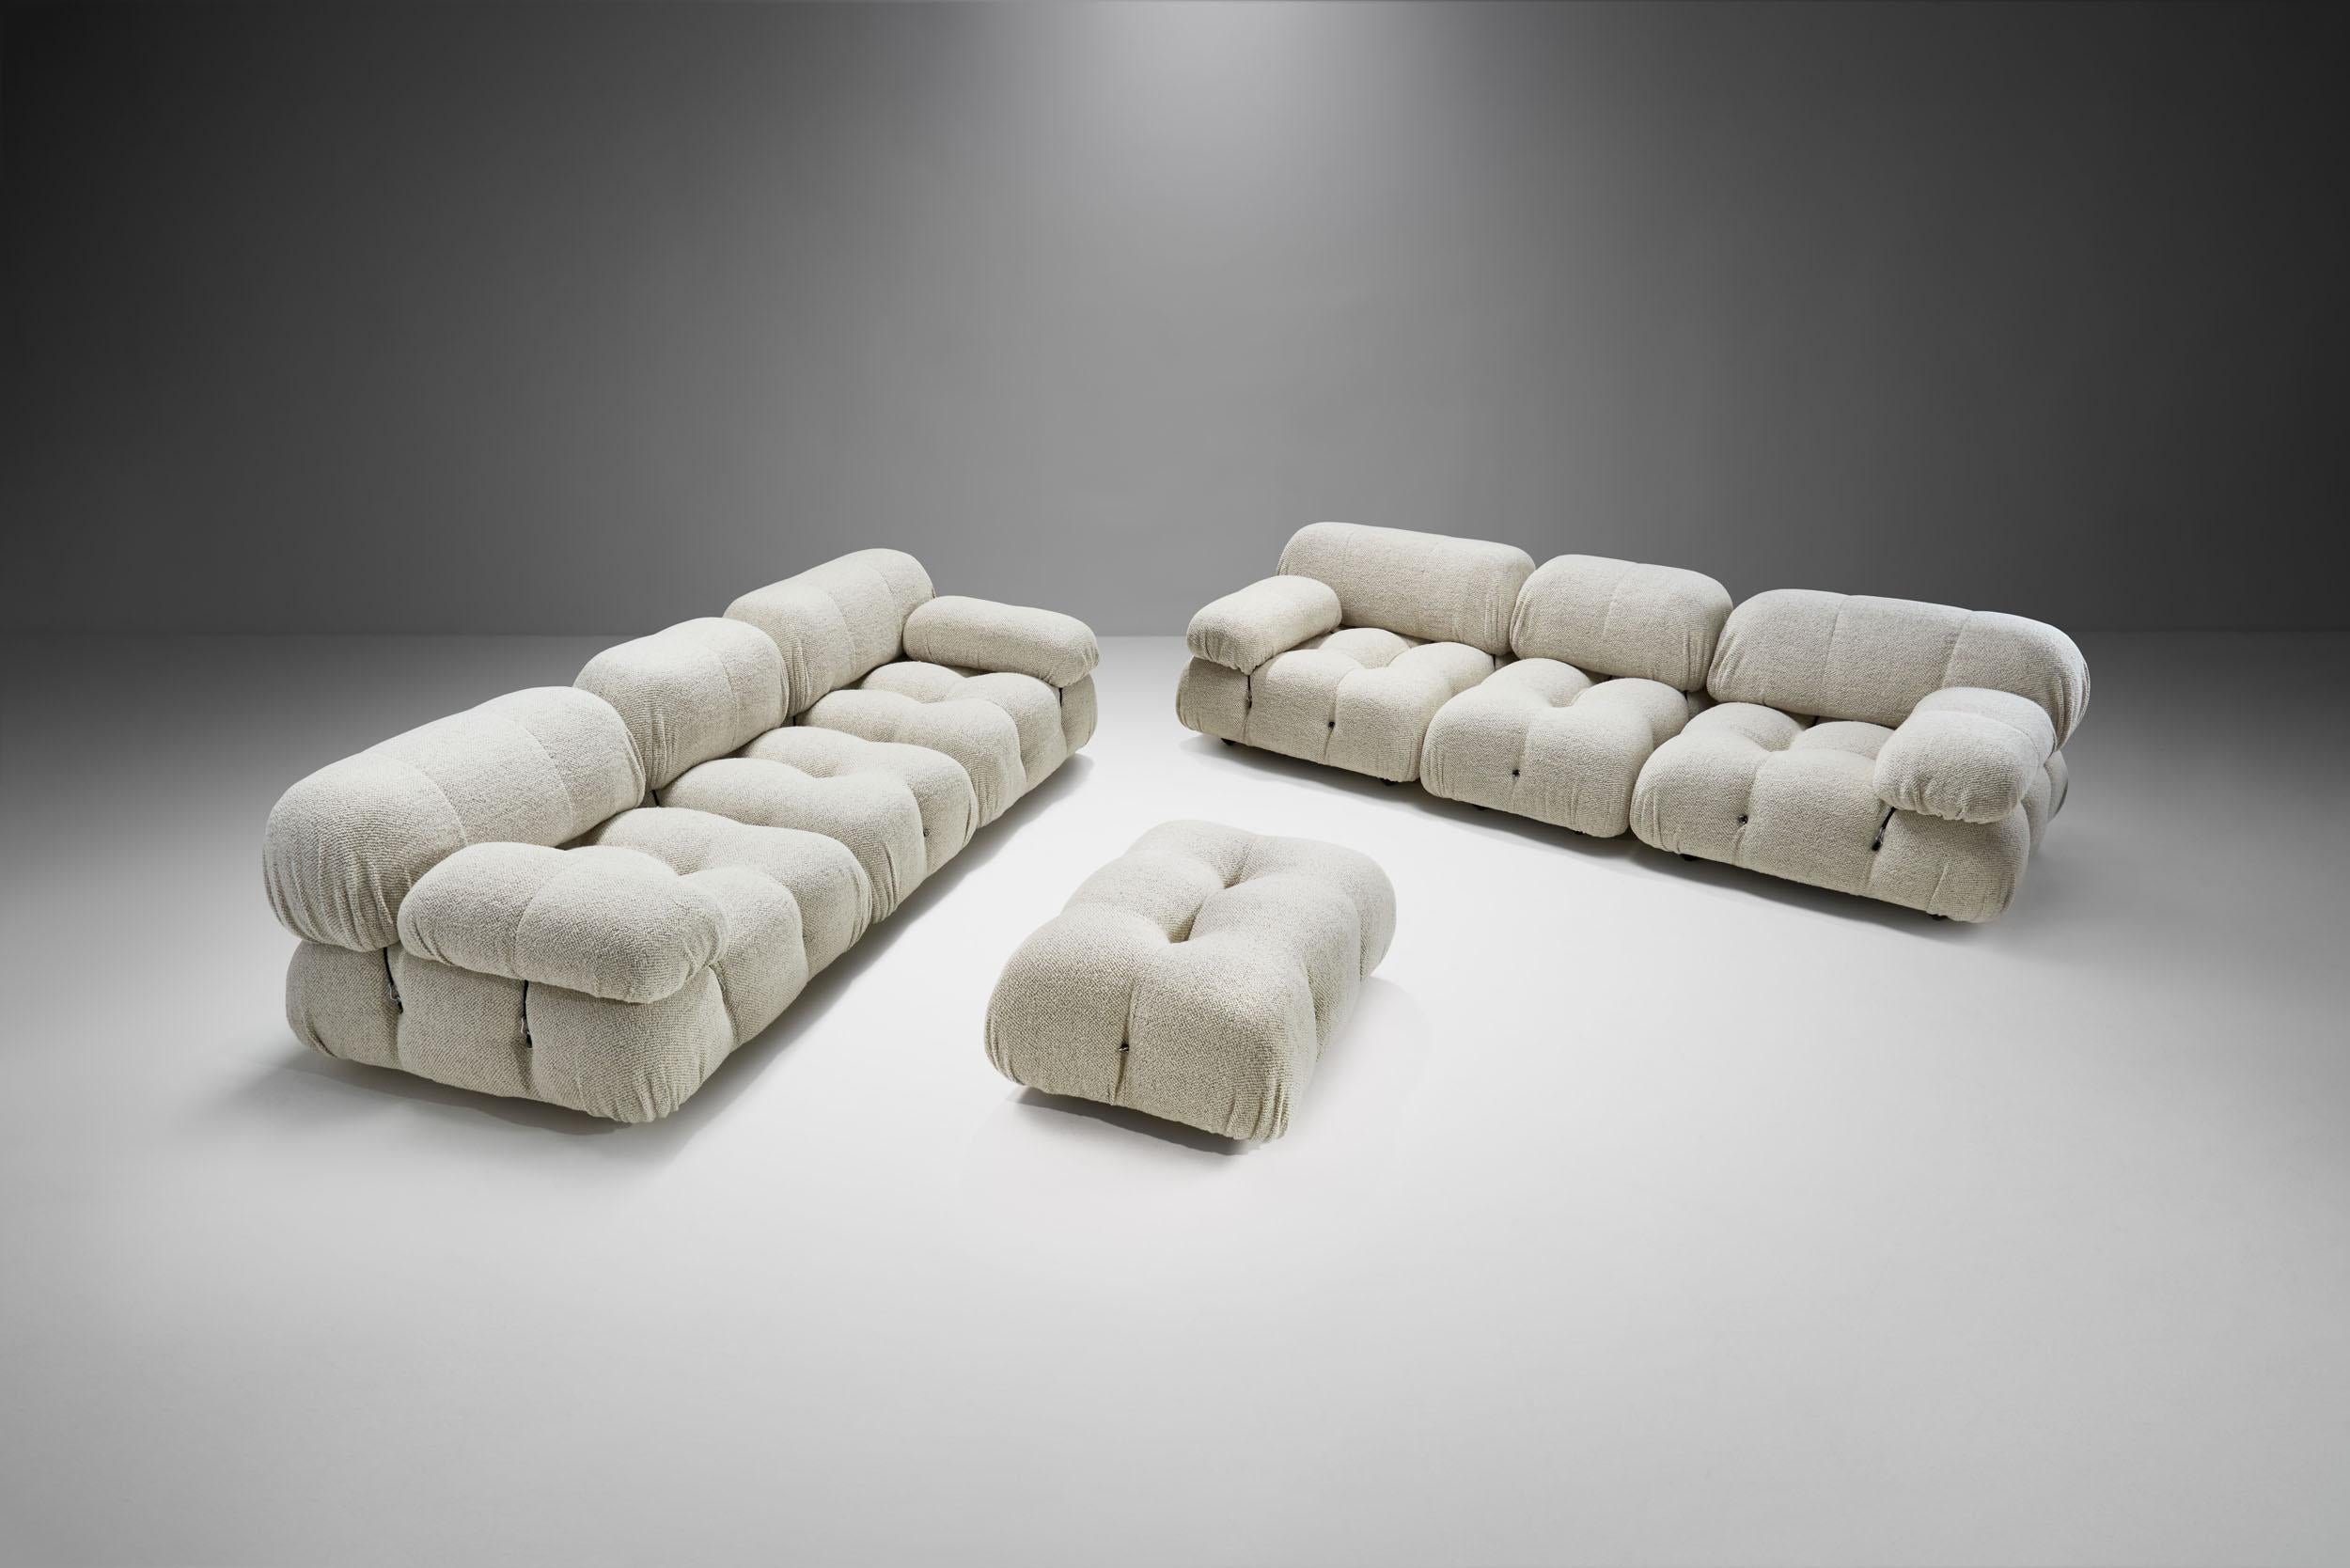 The “Camaleonda” (Italian word play combining the words ‘chameleon’ and ‘wave’) sofa is Mario Bellini’s contemporary classic. The playful, modular design offers endless options for the user, which also inspired the model’s name. Camaleonda has